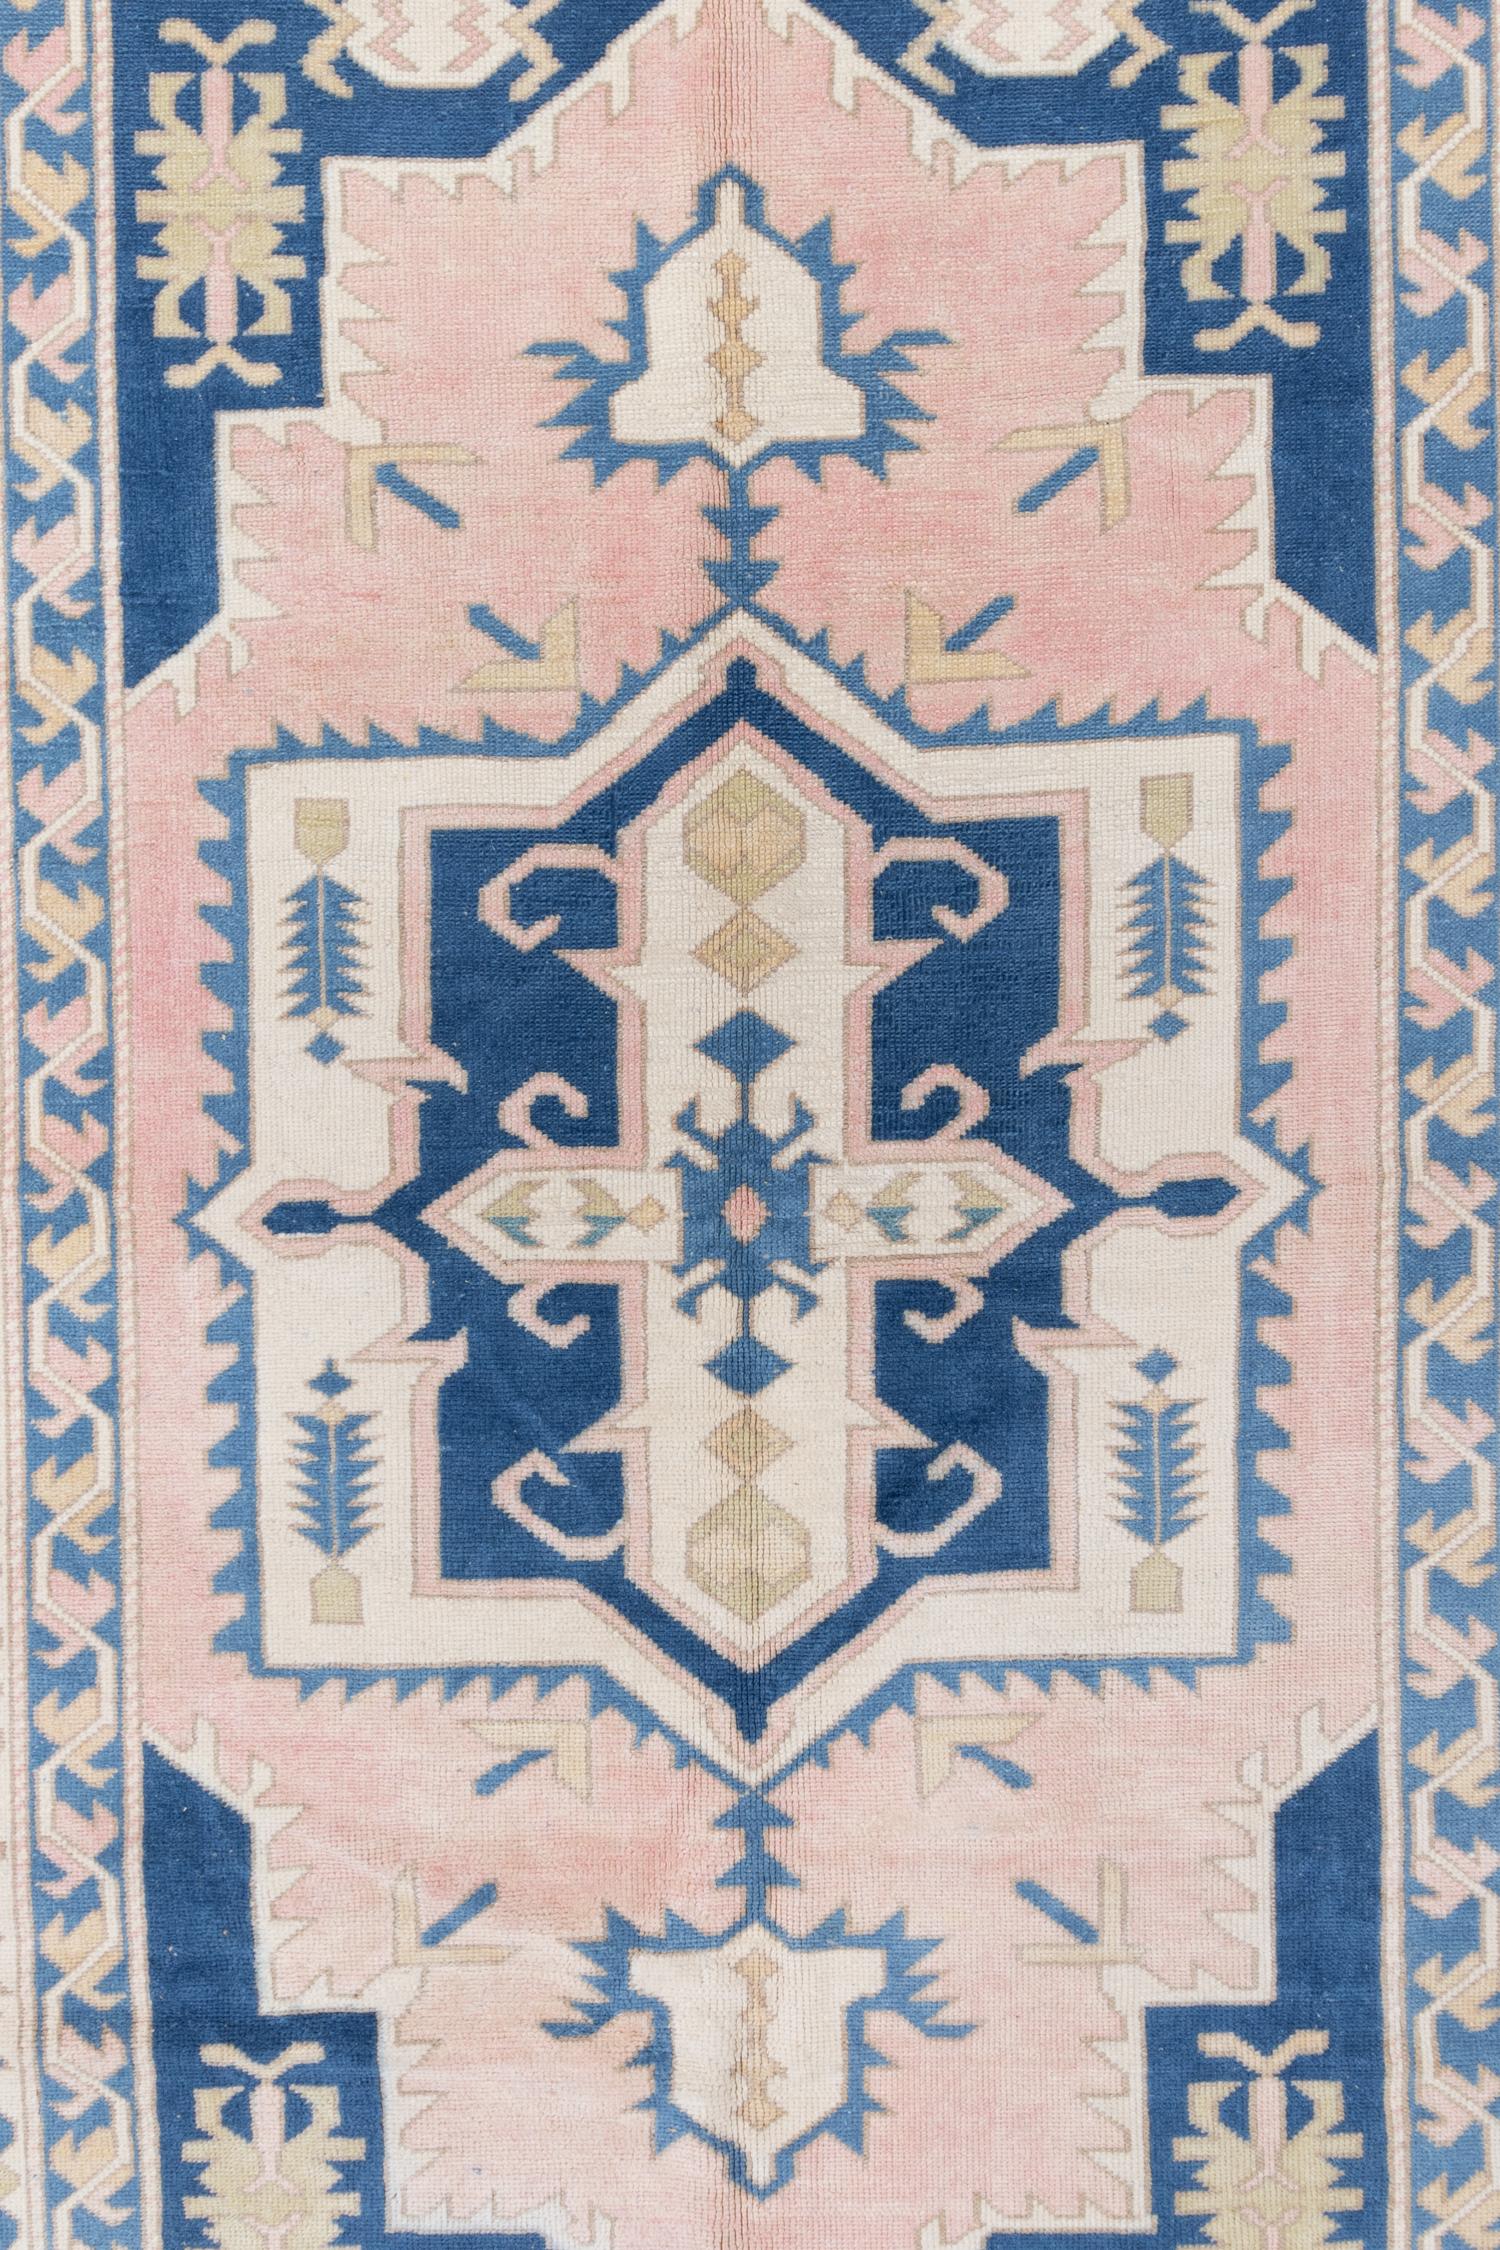 Age: circa 1960

Material: Wool on Cotton

Wear Guide: 0 

Wear Notes:
Vintage and antique rugs are by nature, pre-loved and may show evidence of their past. There are varying degrees of wear to vintage rugs; some show very little and some